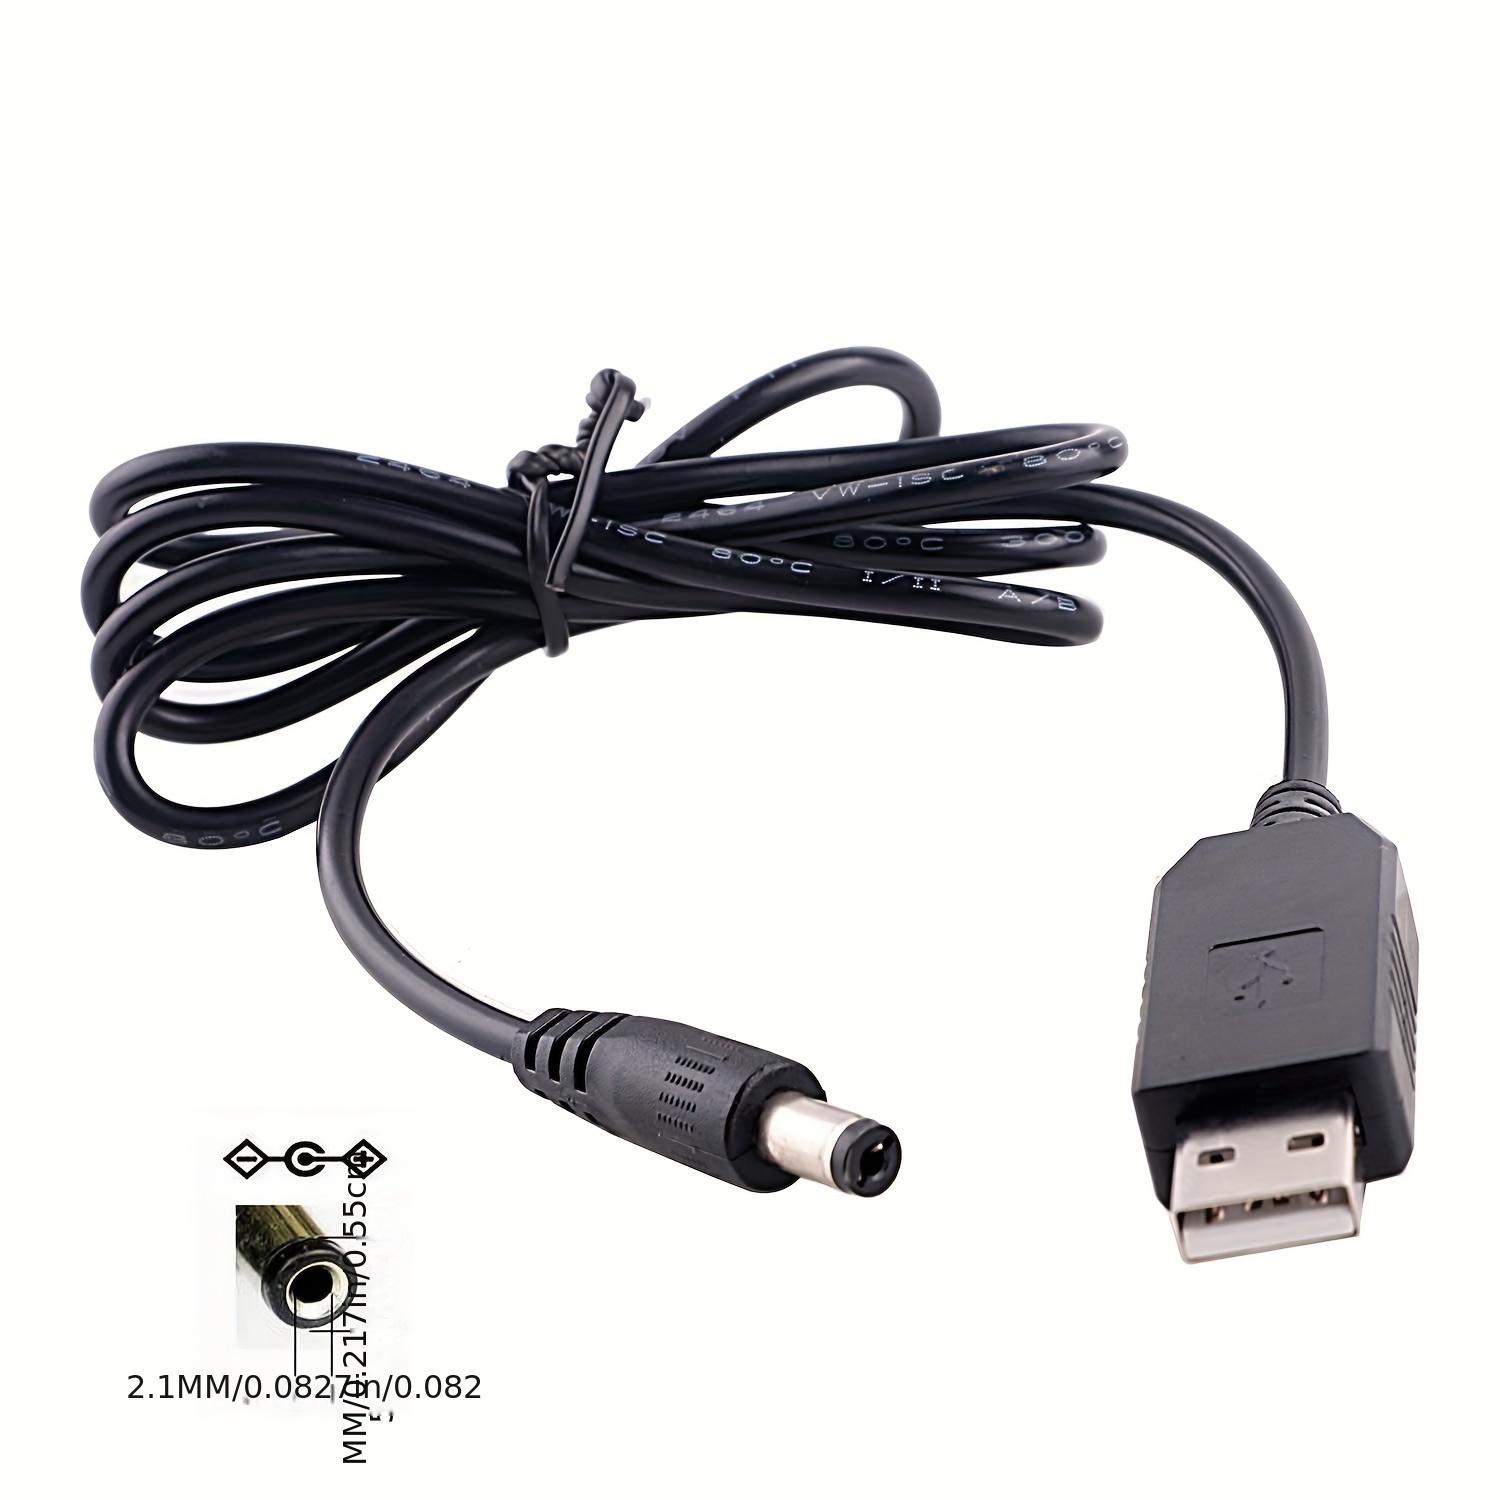 USB DC 5V to 8.4V/9V/12V 5.5x2.1mm Male Plug Power Supply Step-up